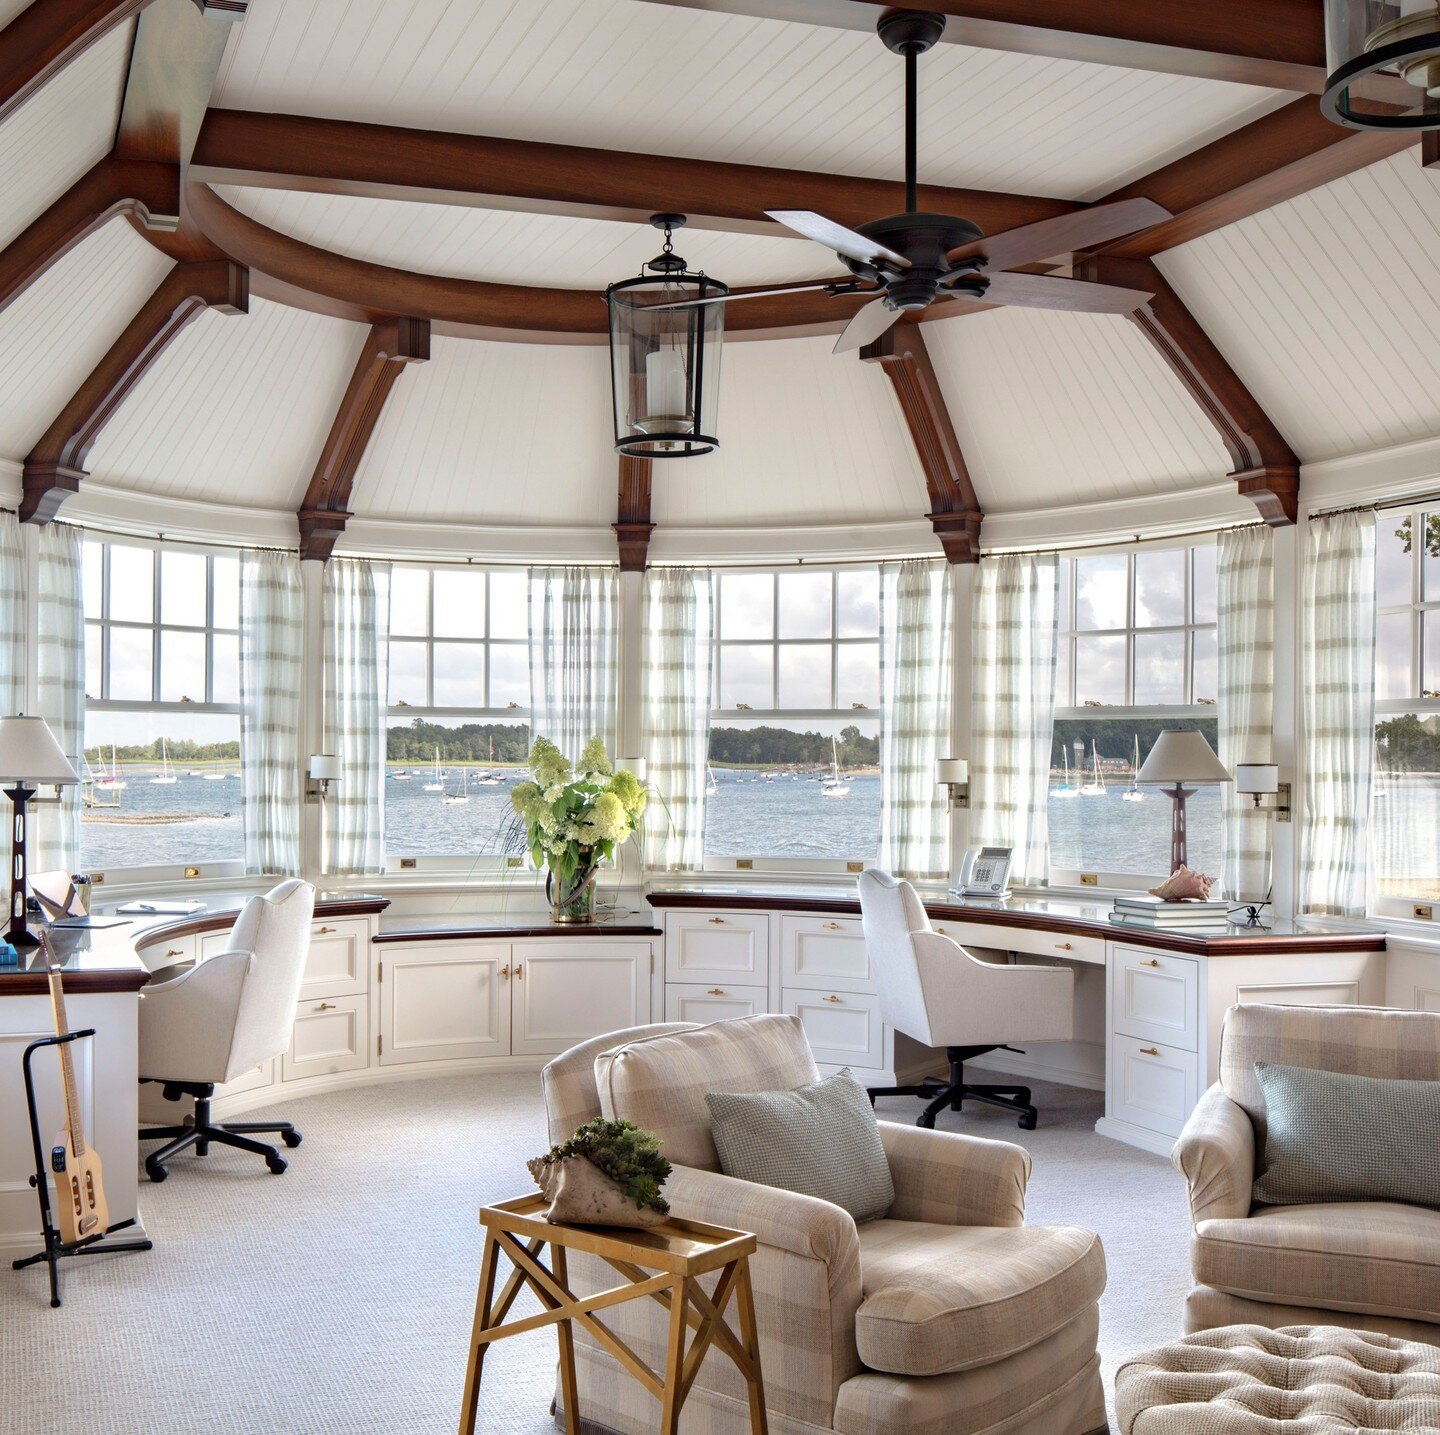 The nautically-themed home office in this 'New England Shingle Style Residence' features built-in desks with panoramic views overlooking Long Island Sound.  Mahogany beams support a radiating beadboard ceiling.⁠ #officewithaview #roomwithaview⁠
⁠
Arc